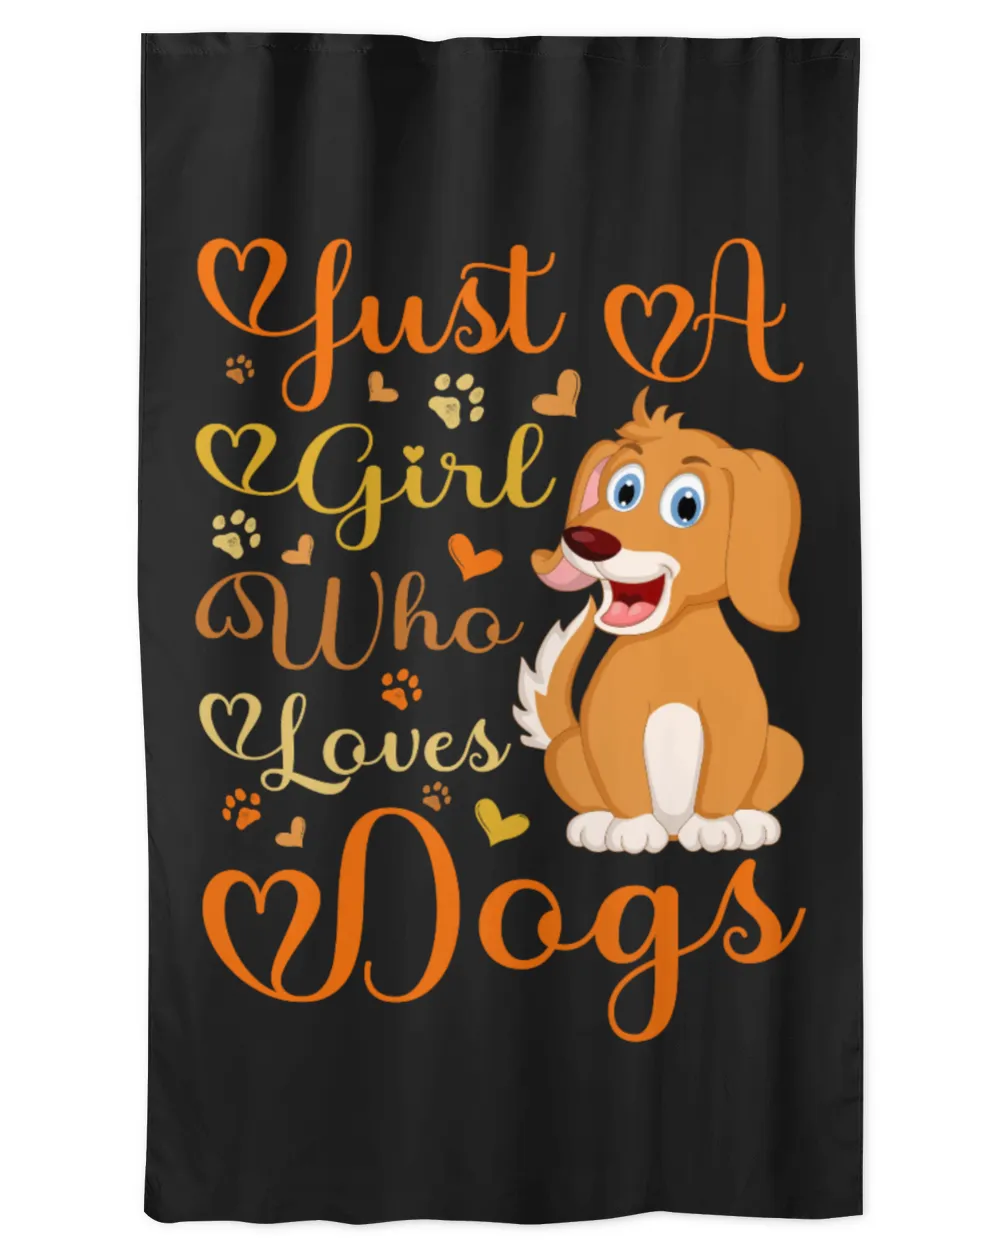 Just A Girl Who Loves Dogs Personalized Grandpa Grandma Mom Sister For Dog Lovers